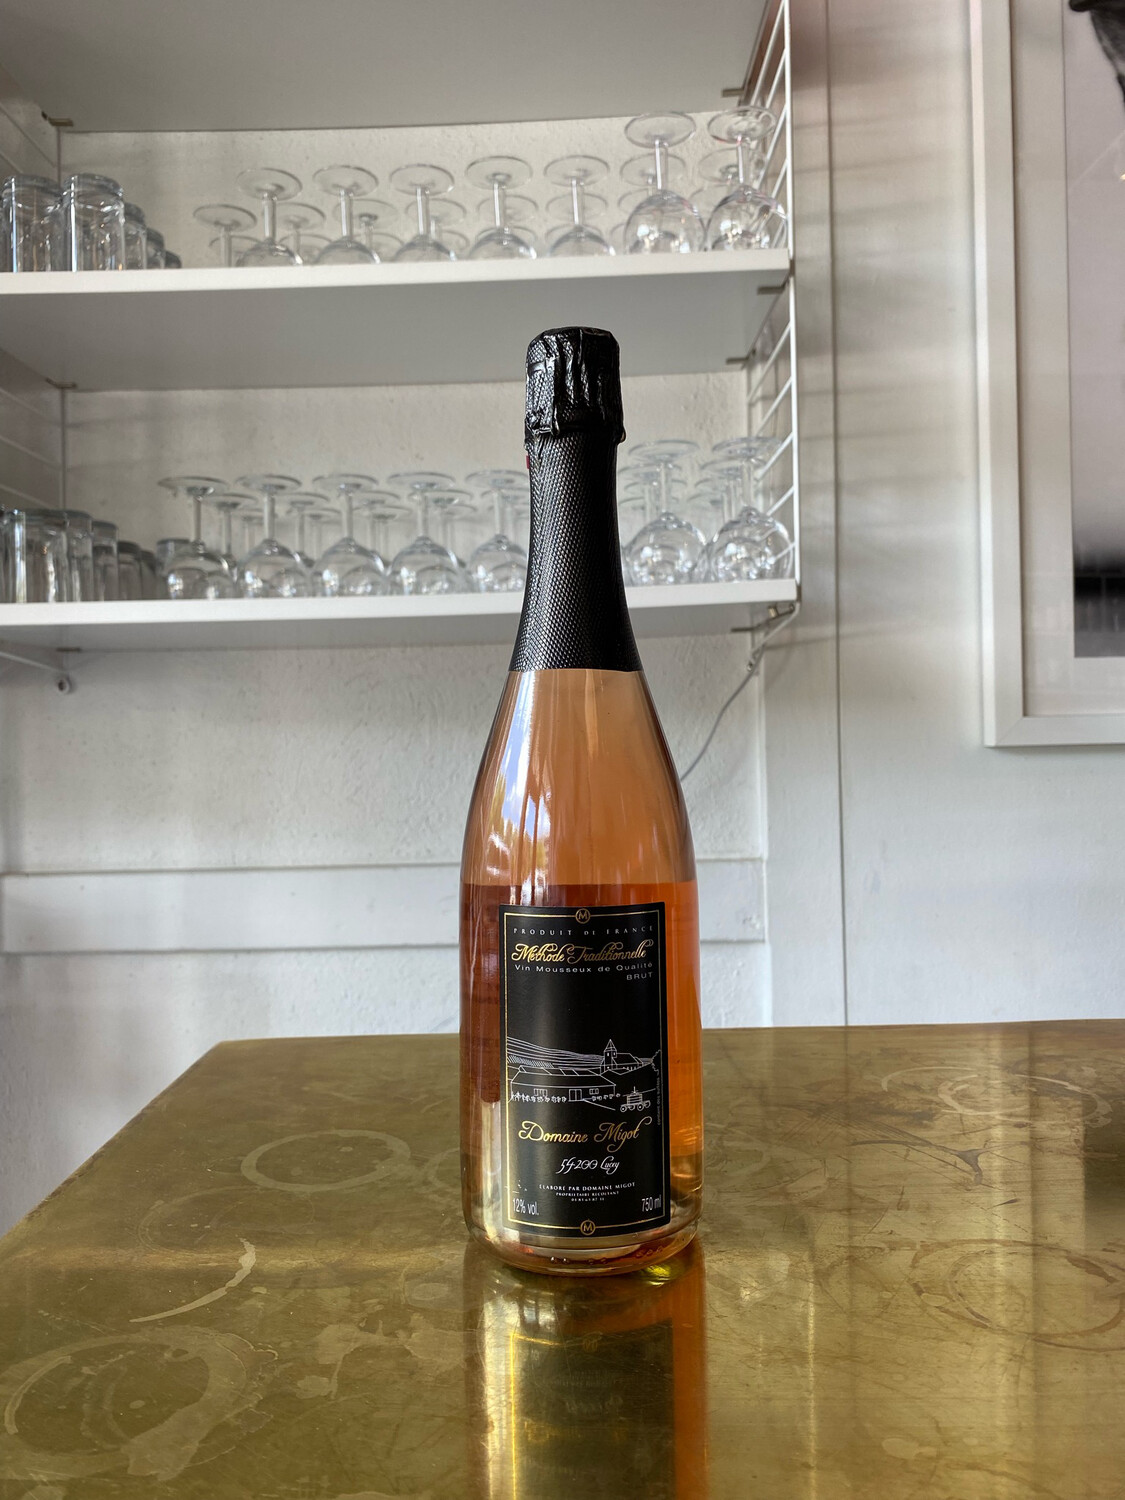 Domaine Migot, Brut Methode Traditionnelle (NV) Gamay